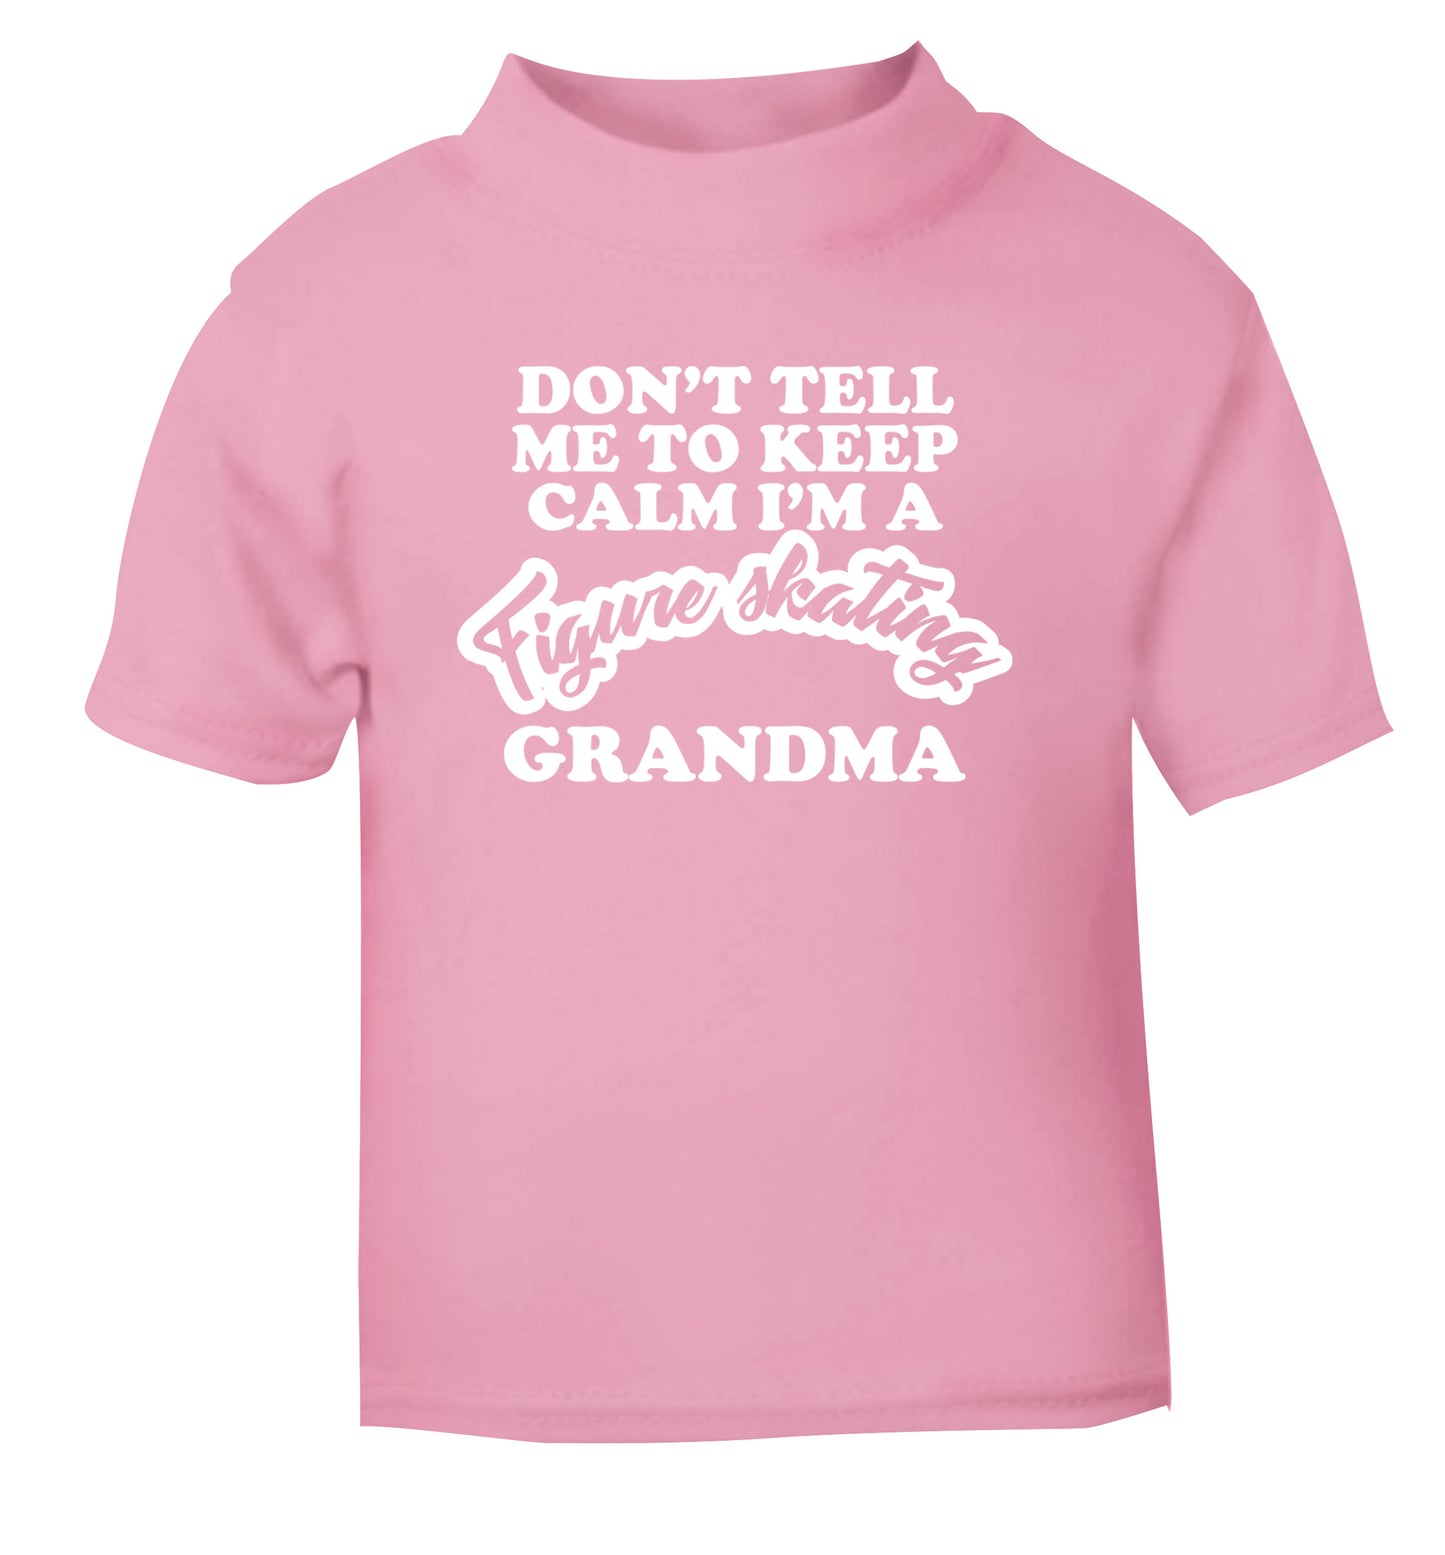 Don't tell me to keep calm I'm a figure skating grandma light pink Baby Toddler Tshirt 2 Years